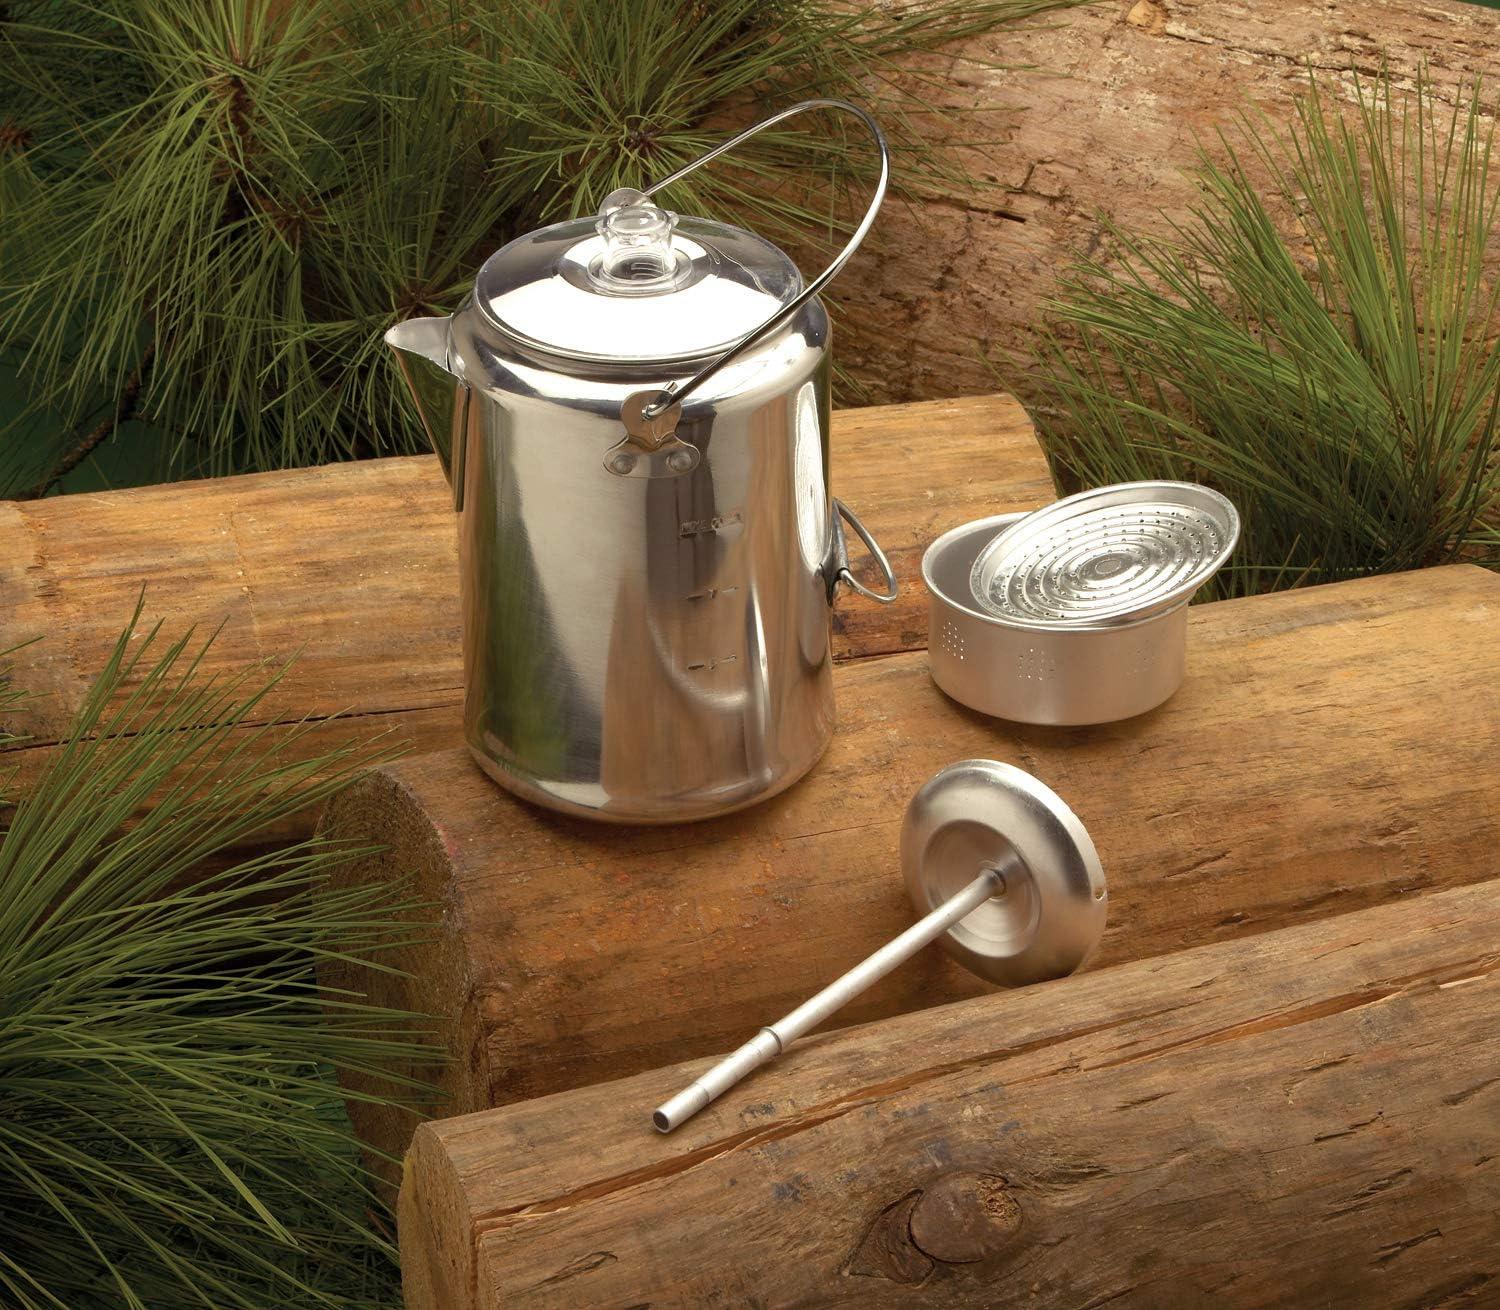 Texsport 9 Cup Stainless Steel Percolator Coffee Maker for Outdoor Camping